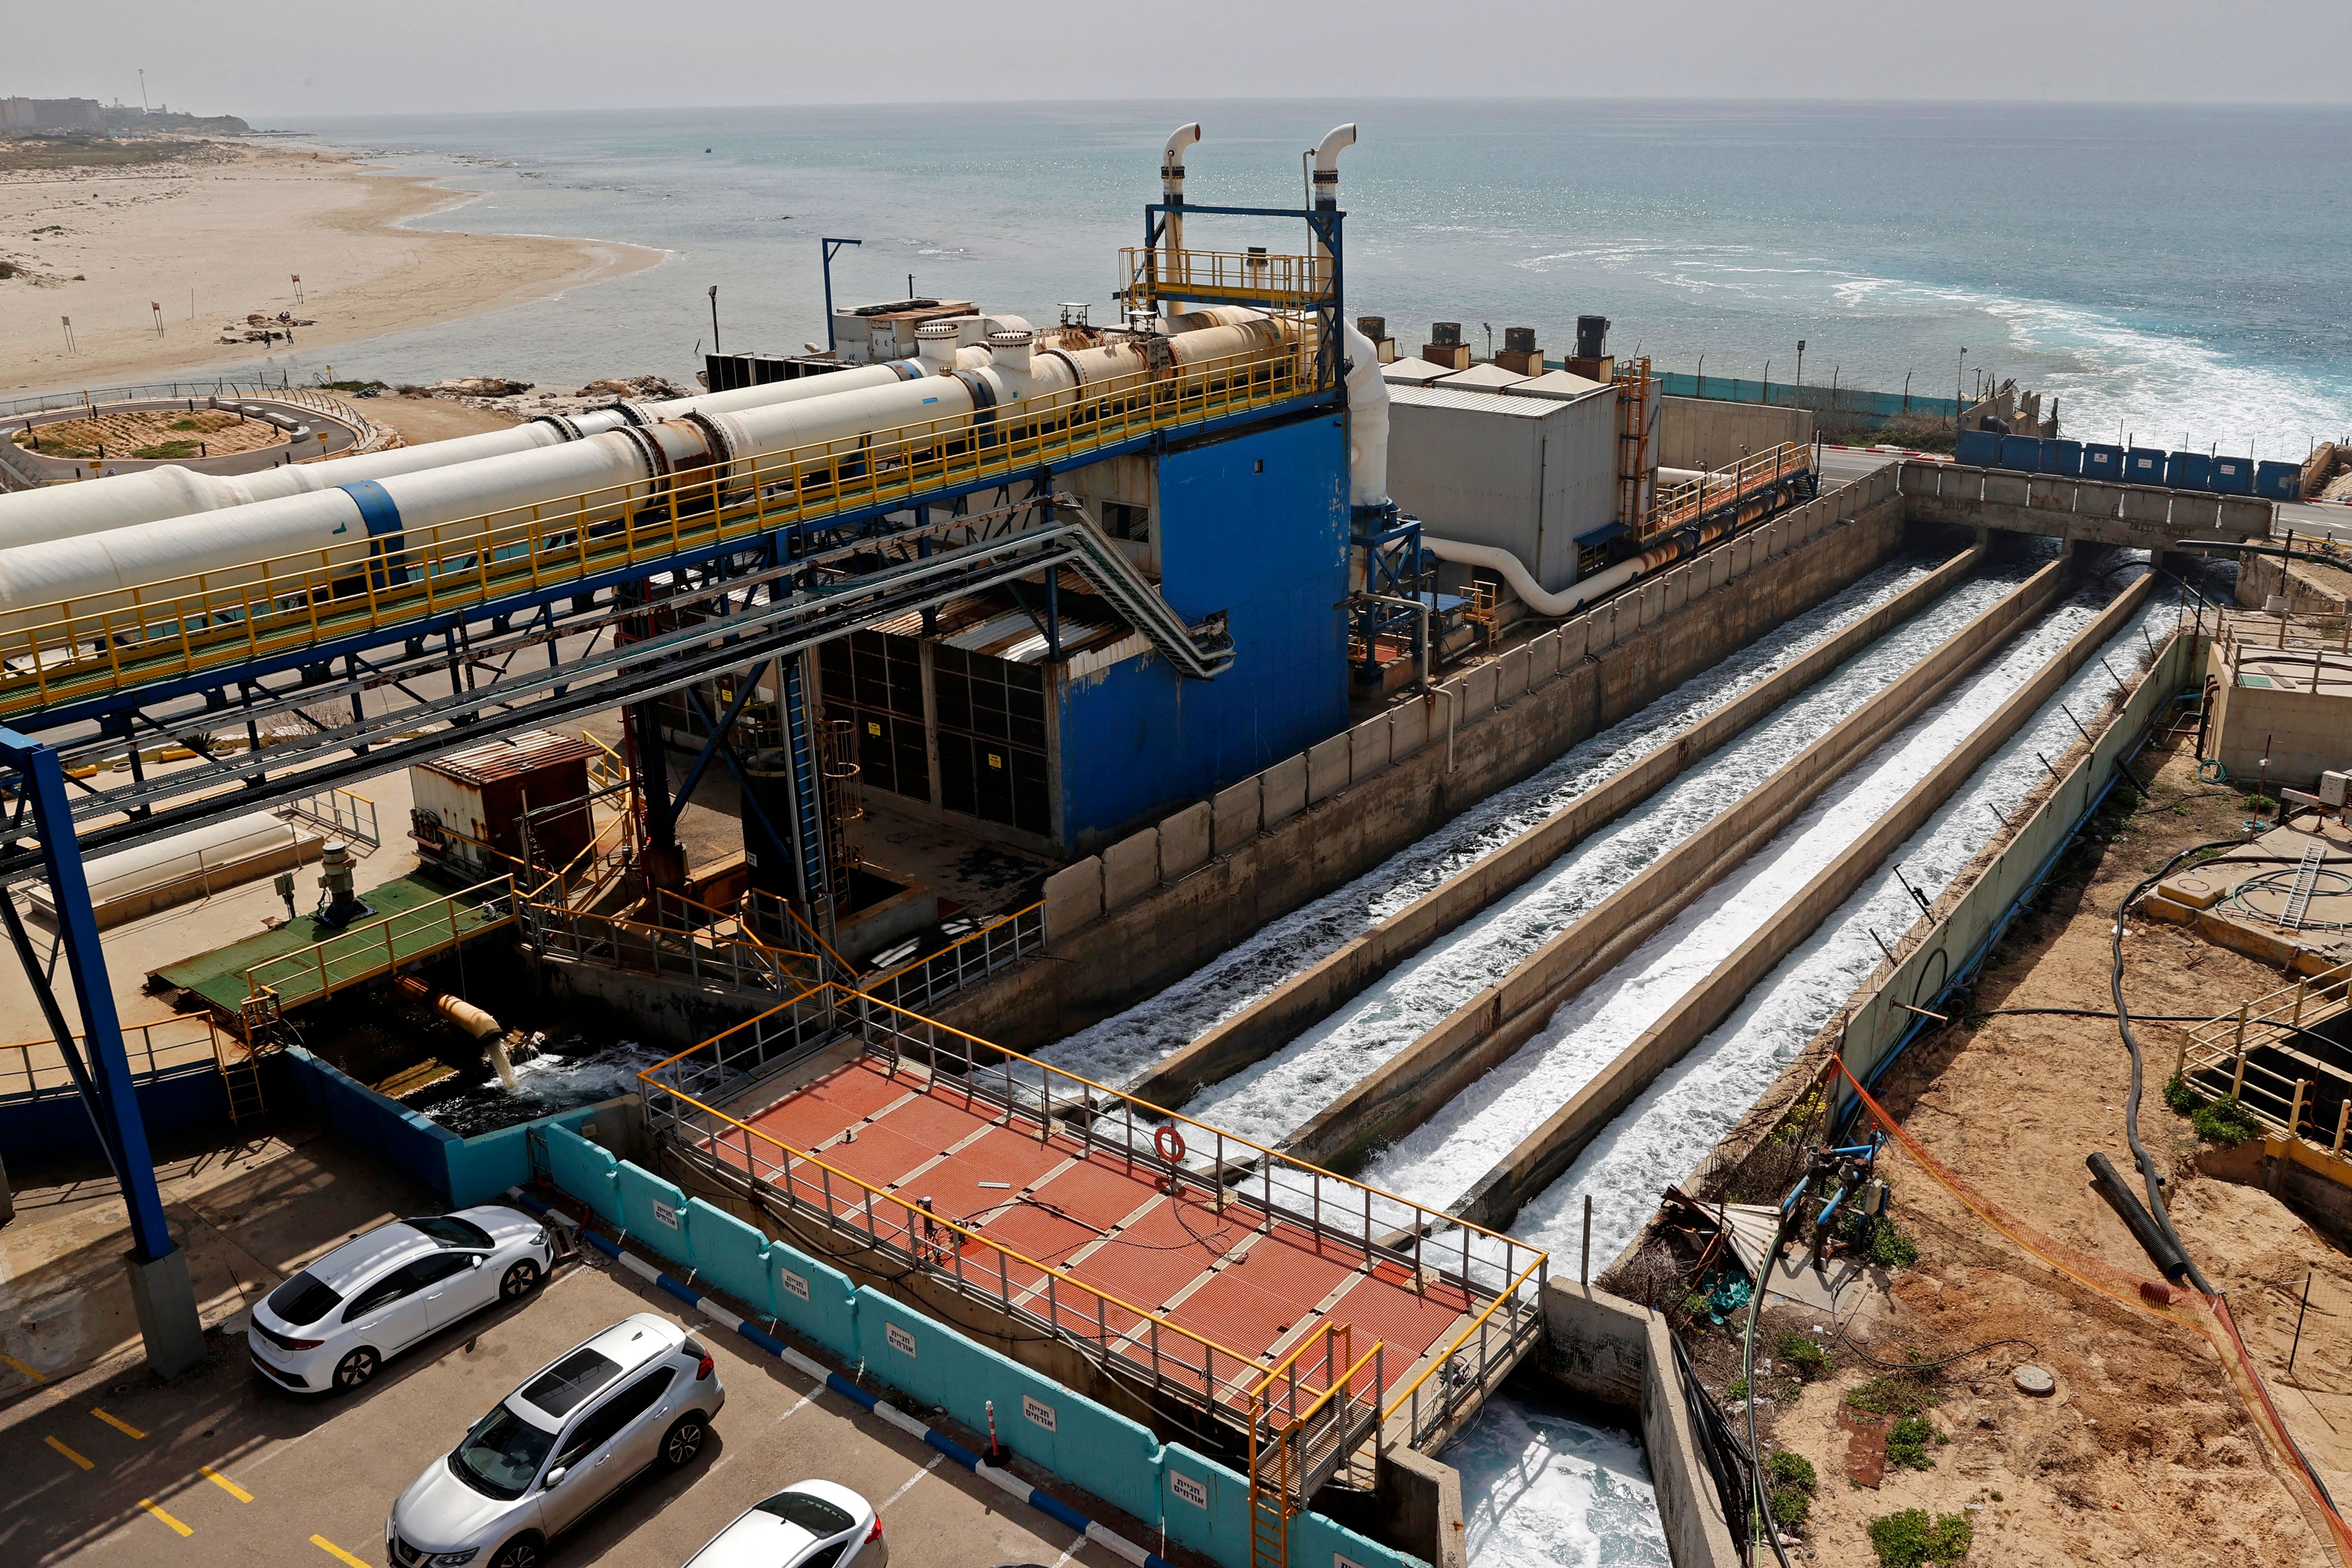 The Hadera Desalination Facility in the central Israeli coastal town of Hadera on April 3, 2022. Photo by JACK GUEZ/AFP via Getty Images.